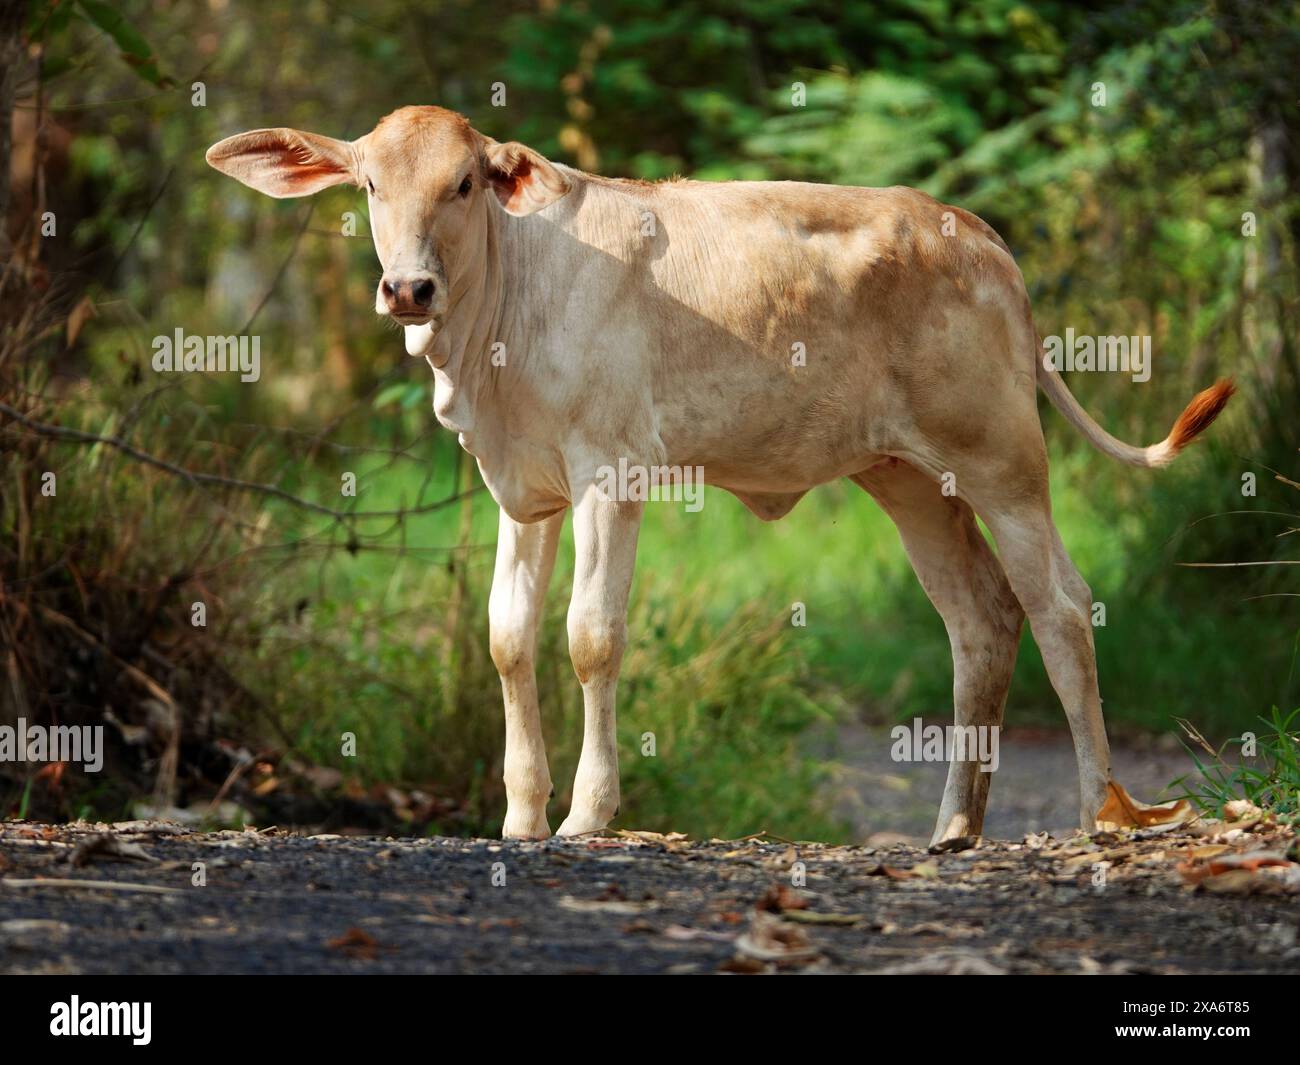 A calf standing on a forest trail Stock Photo